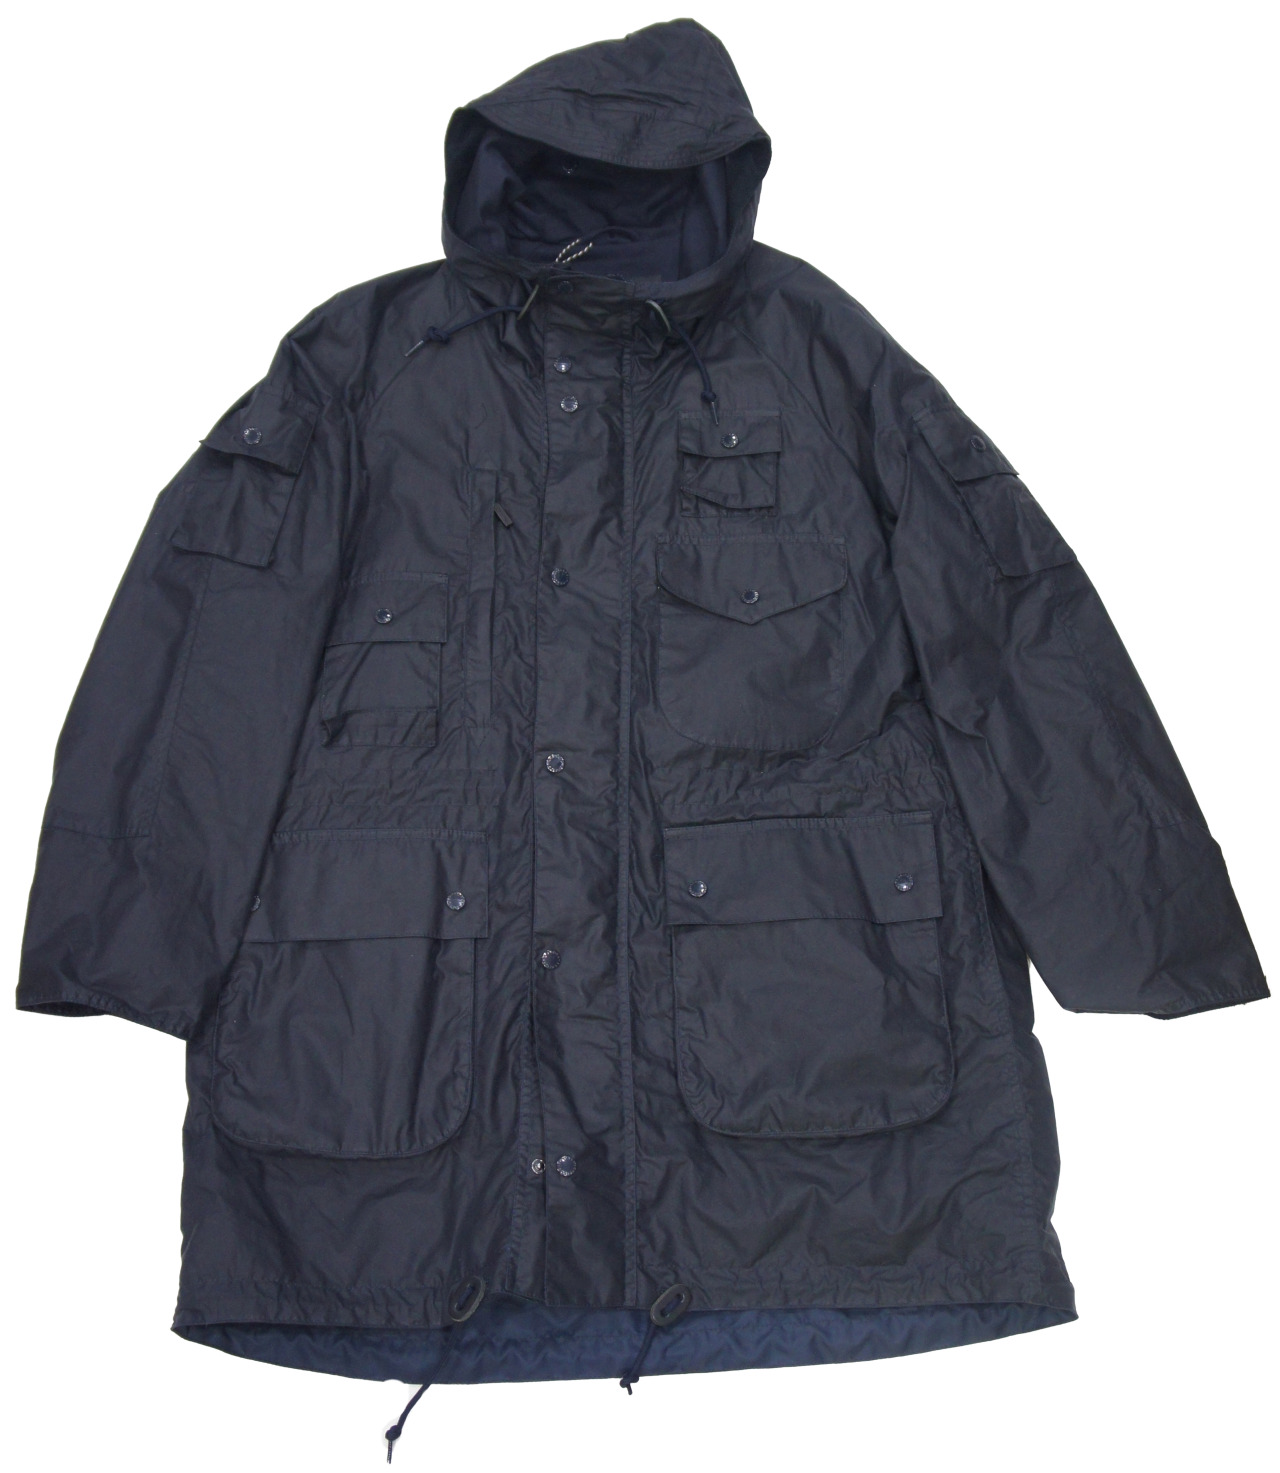 NEPENTHES NEW YORK — 「SPECIAL RELEASE」 Barbour x Engineered